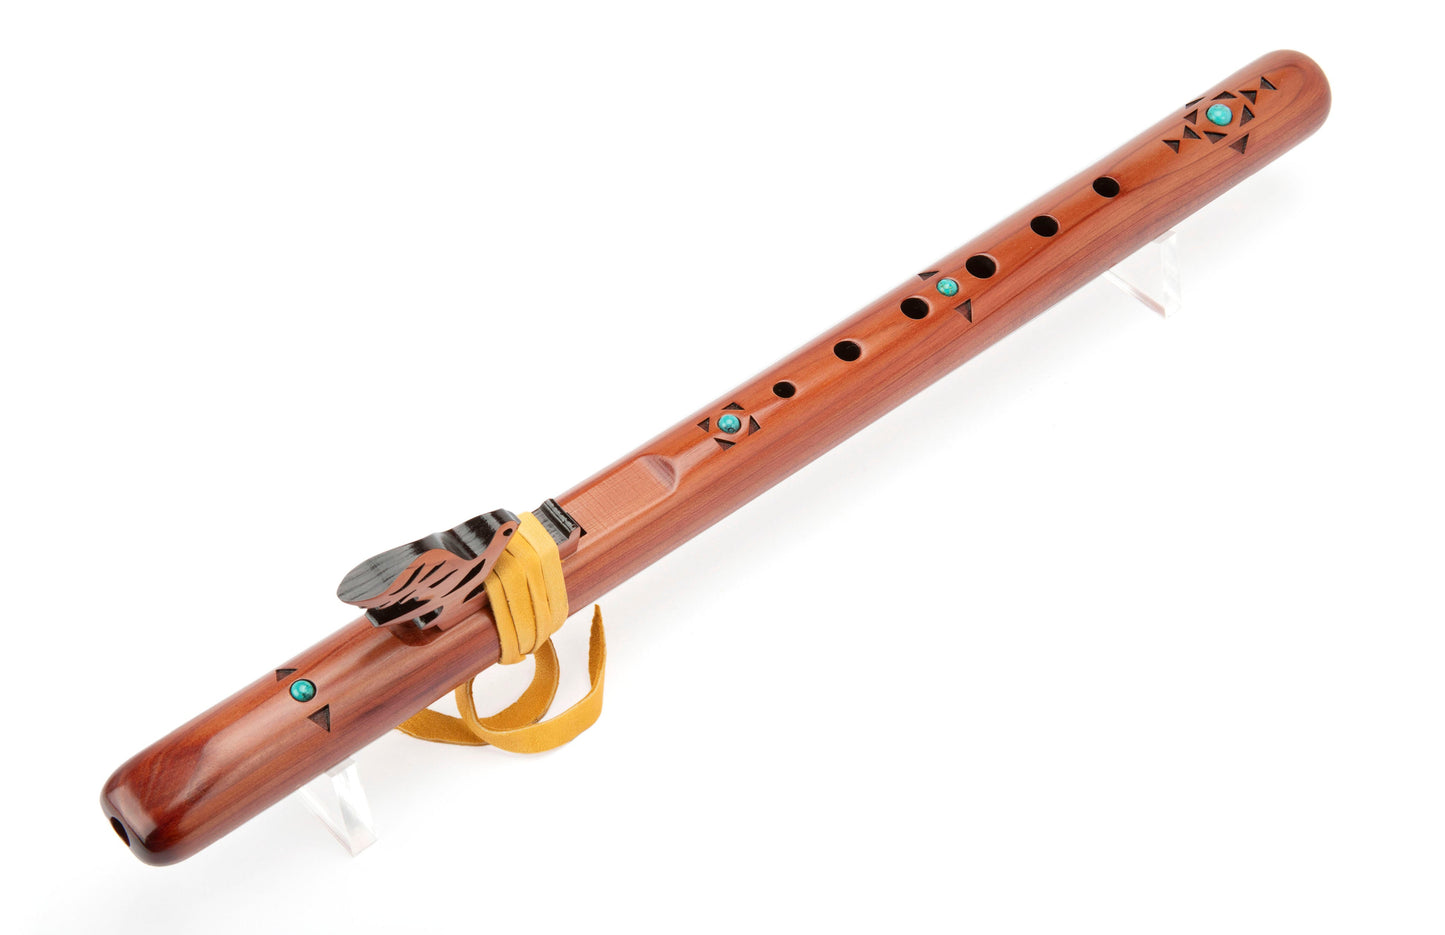 High Spirits Native American Style Flute Sparrowhawk "A", Aromatic Cedar With Turquoise Inlay Native American Flutes High Spirits Flutes   